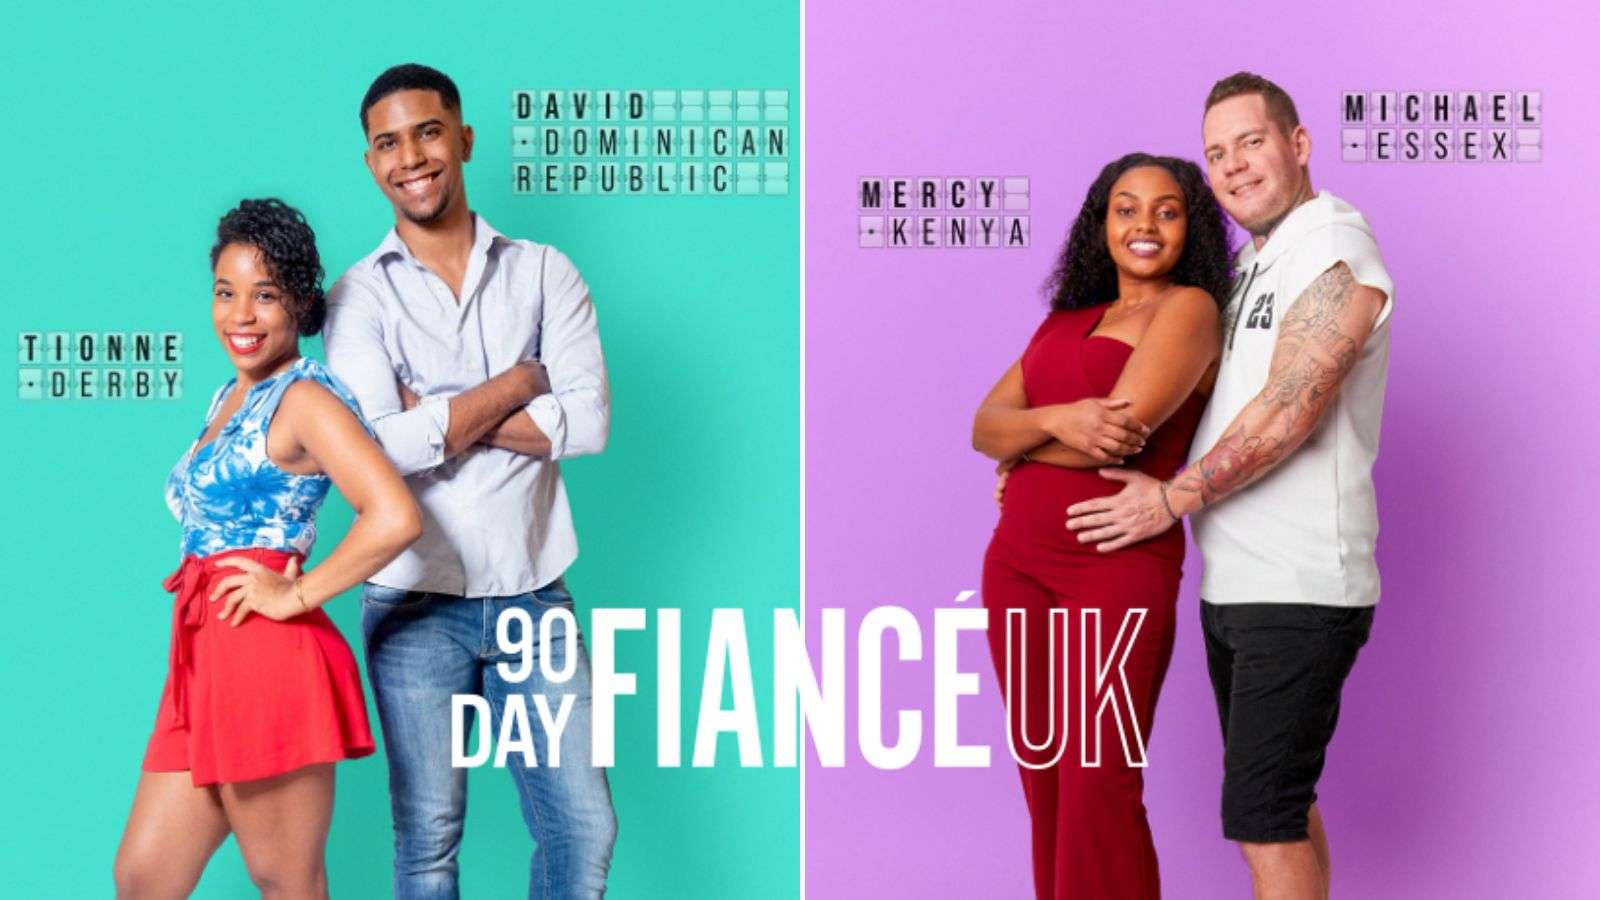 Tionne, David, Mercy, and Michael from 90 Day Fiancé UK